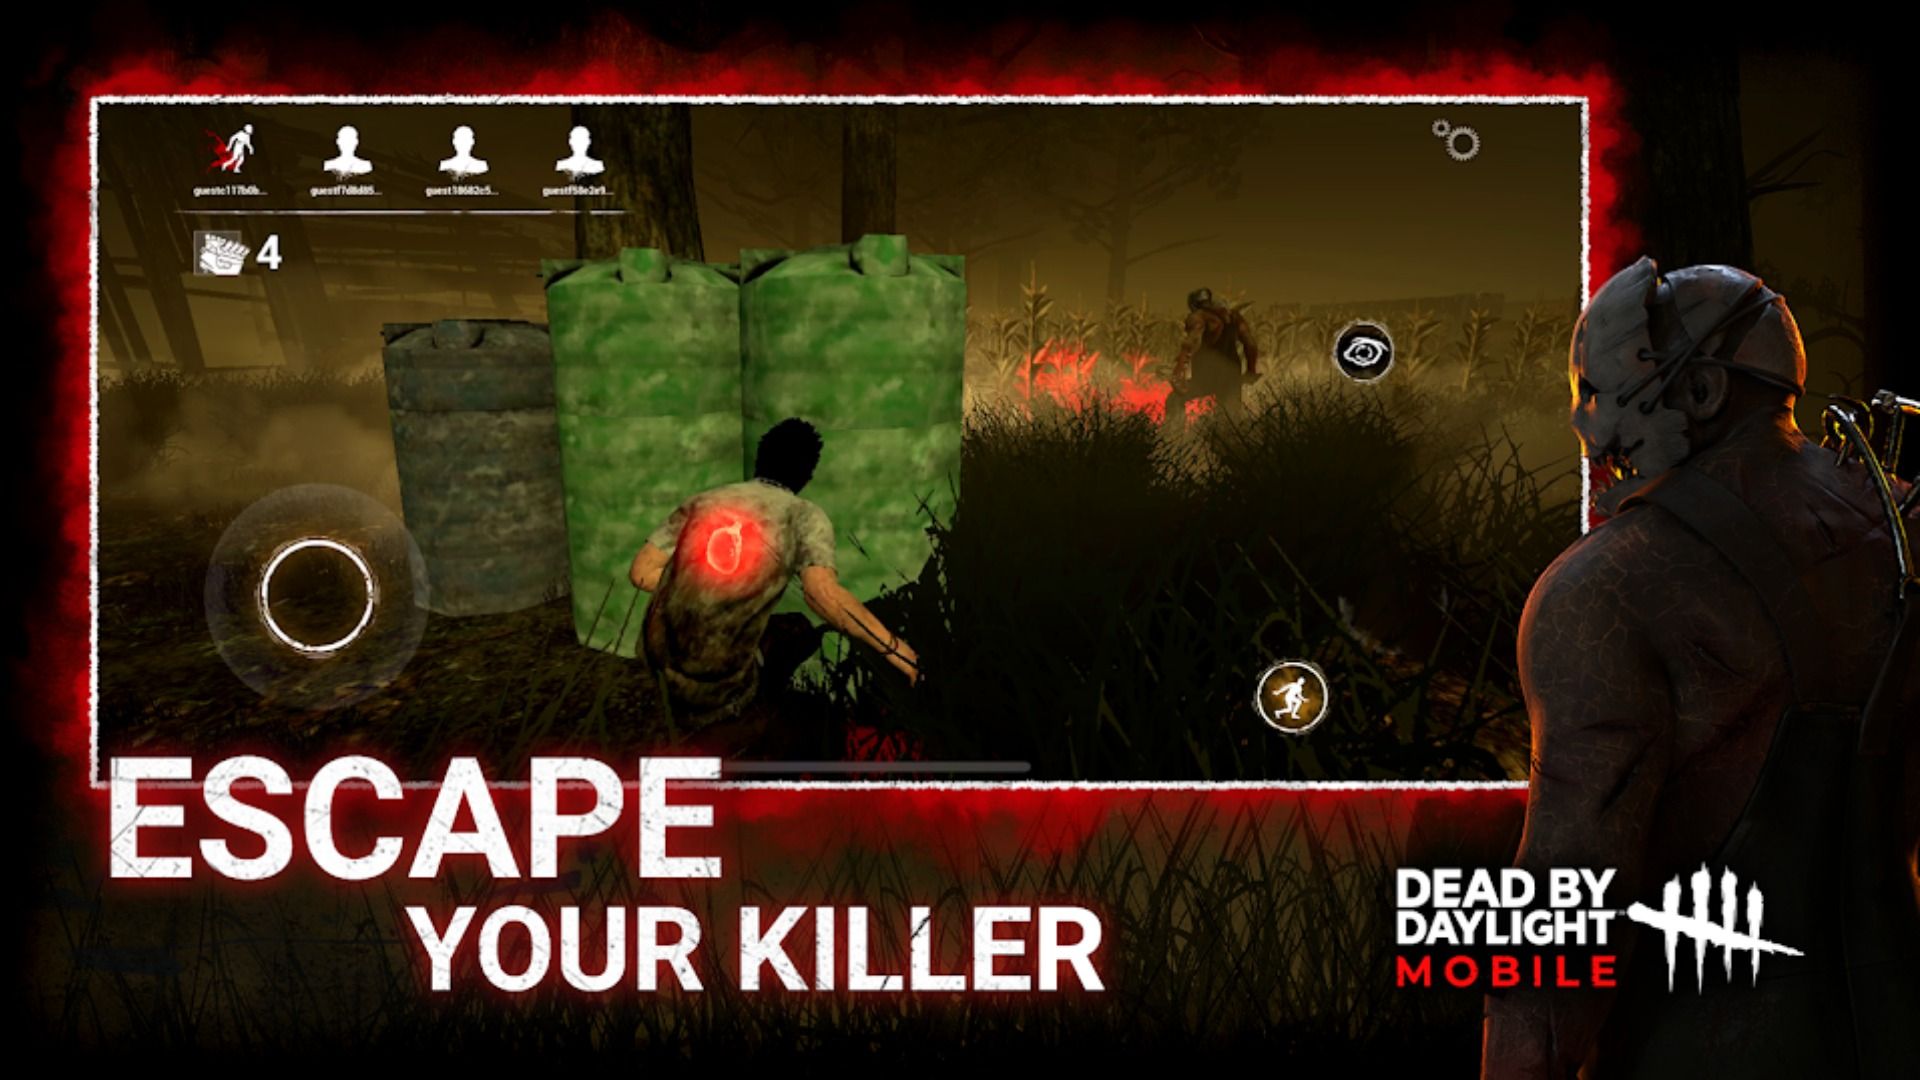 Dead By Daylight - Android/iOS Games